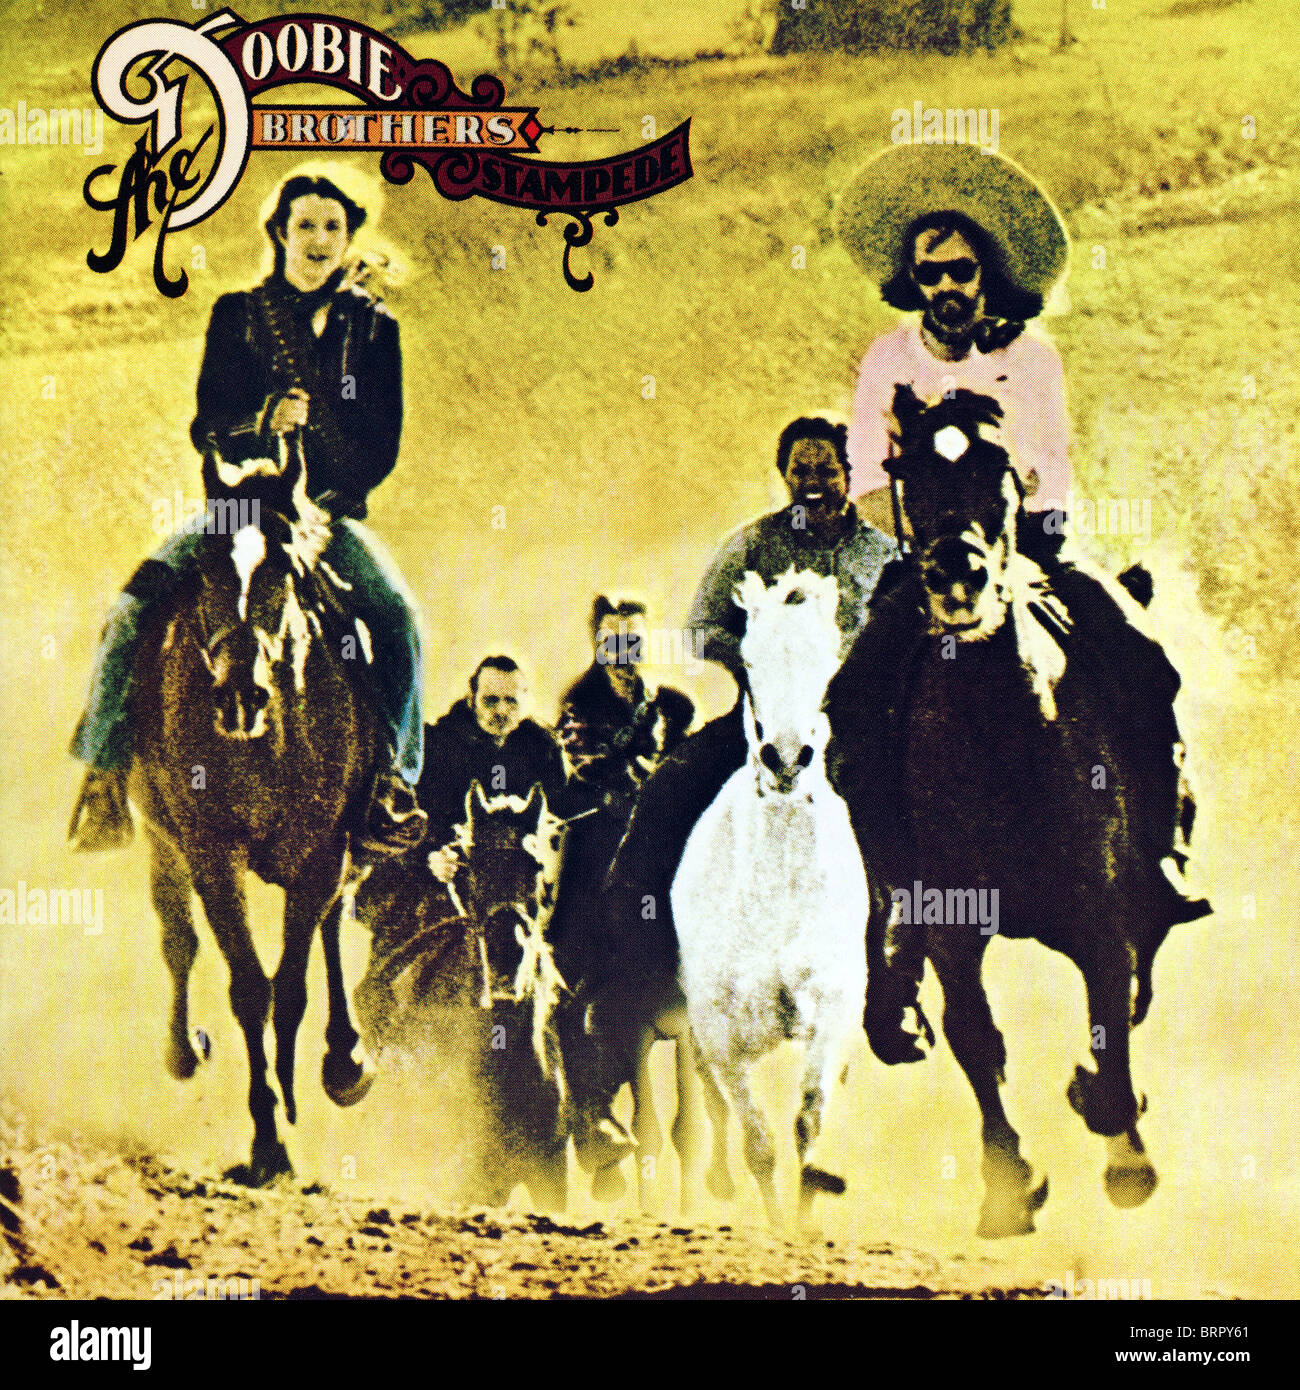 Album cover of Stampede by The Doobie Brothers released by Warner Bros. Records in 1975 Stock Photo